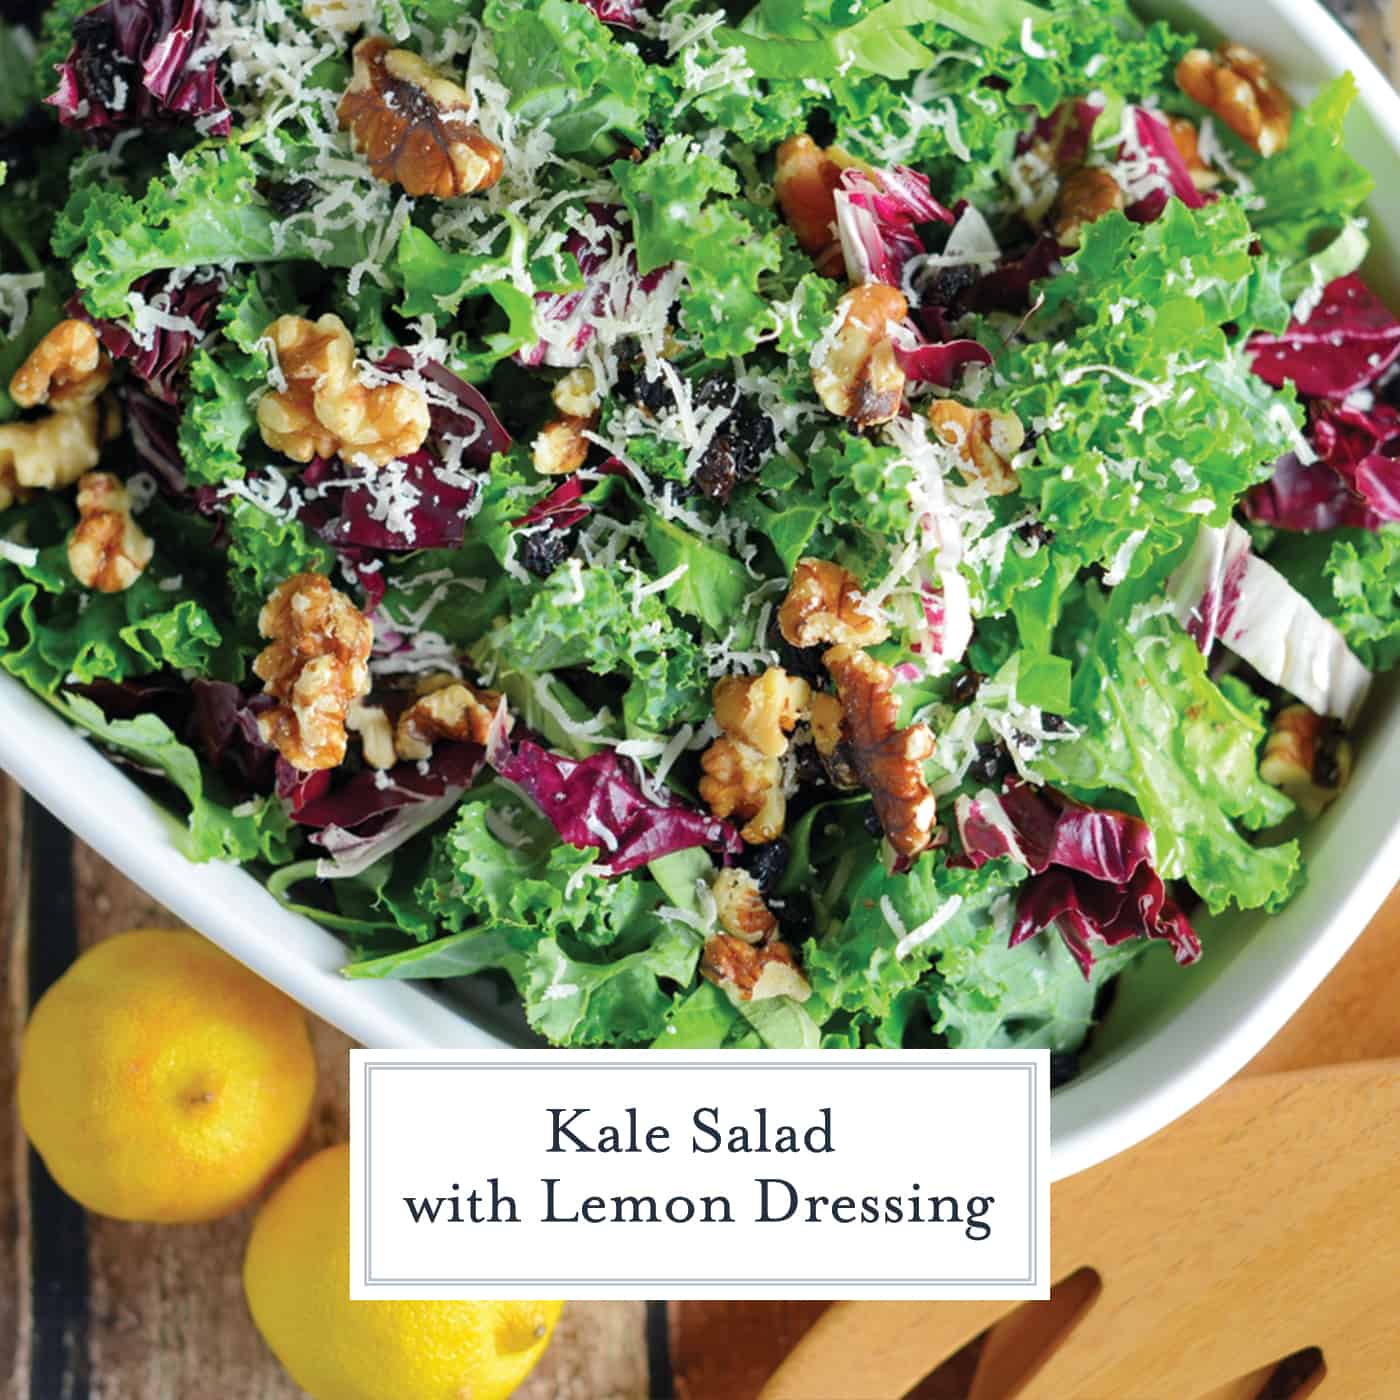 Kale Salad with Lemon Dressing is tossed with currants, radicchio, walnuts and a lemon dressing. Learn how to massage kale salad and make a delicious salad! #kalesaladrecipes #kalesaladdressing www.savoryexperiments.com 